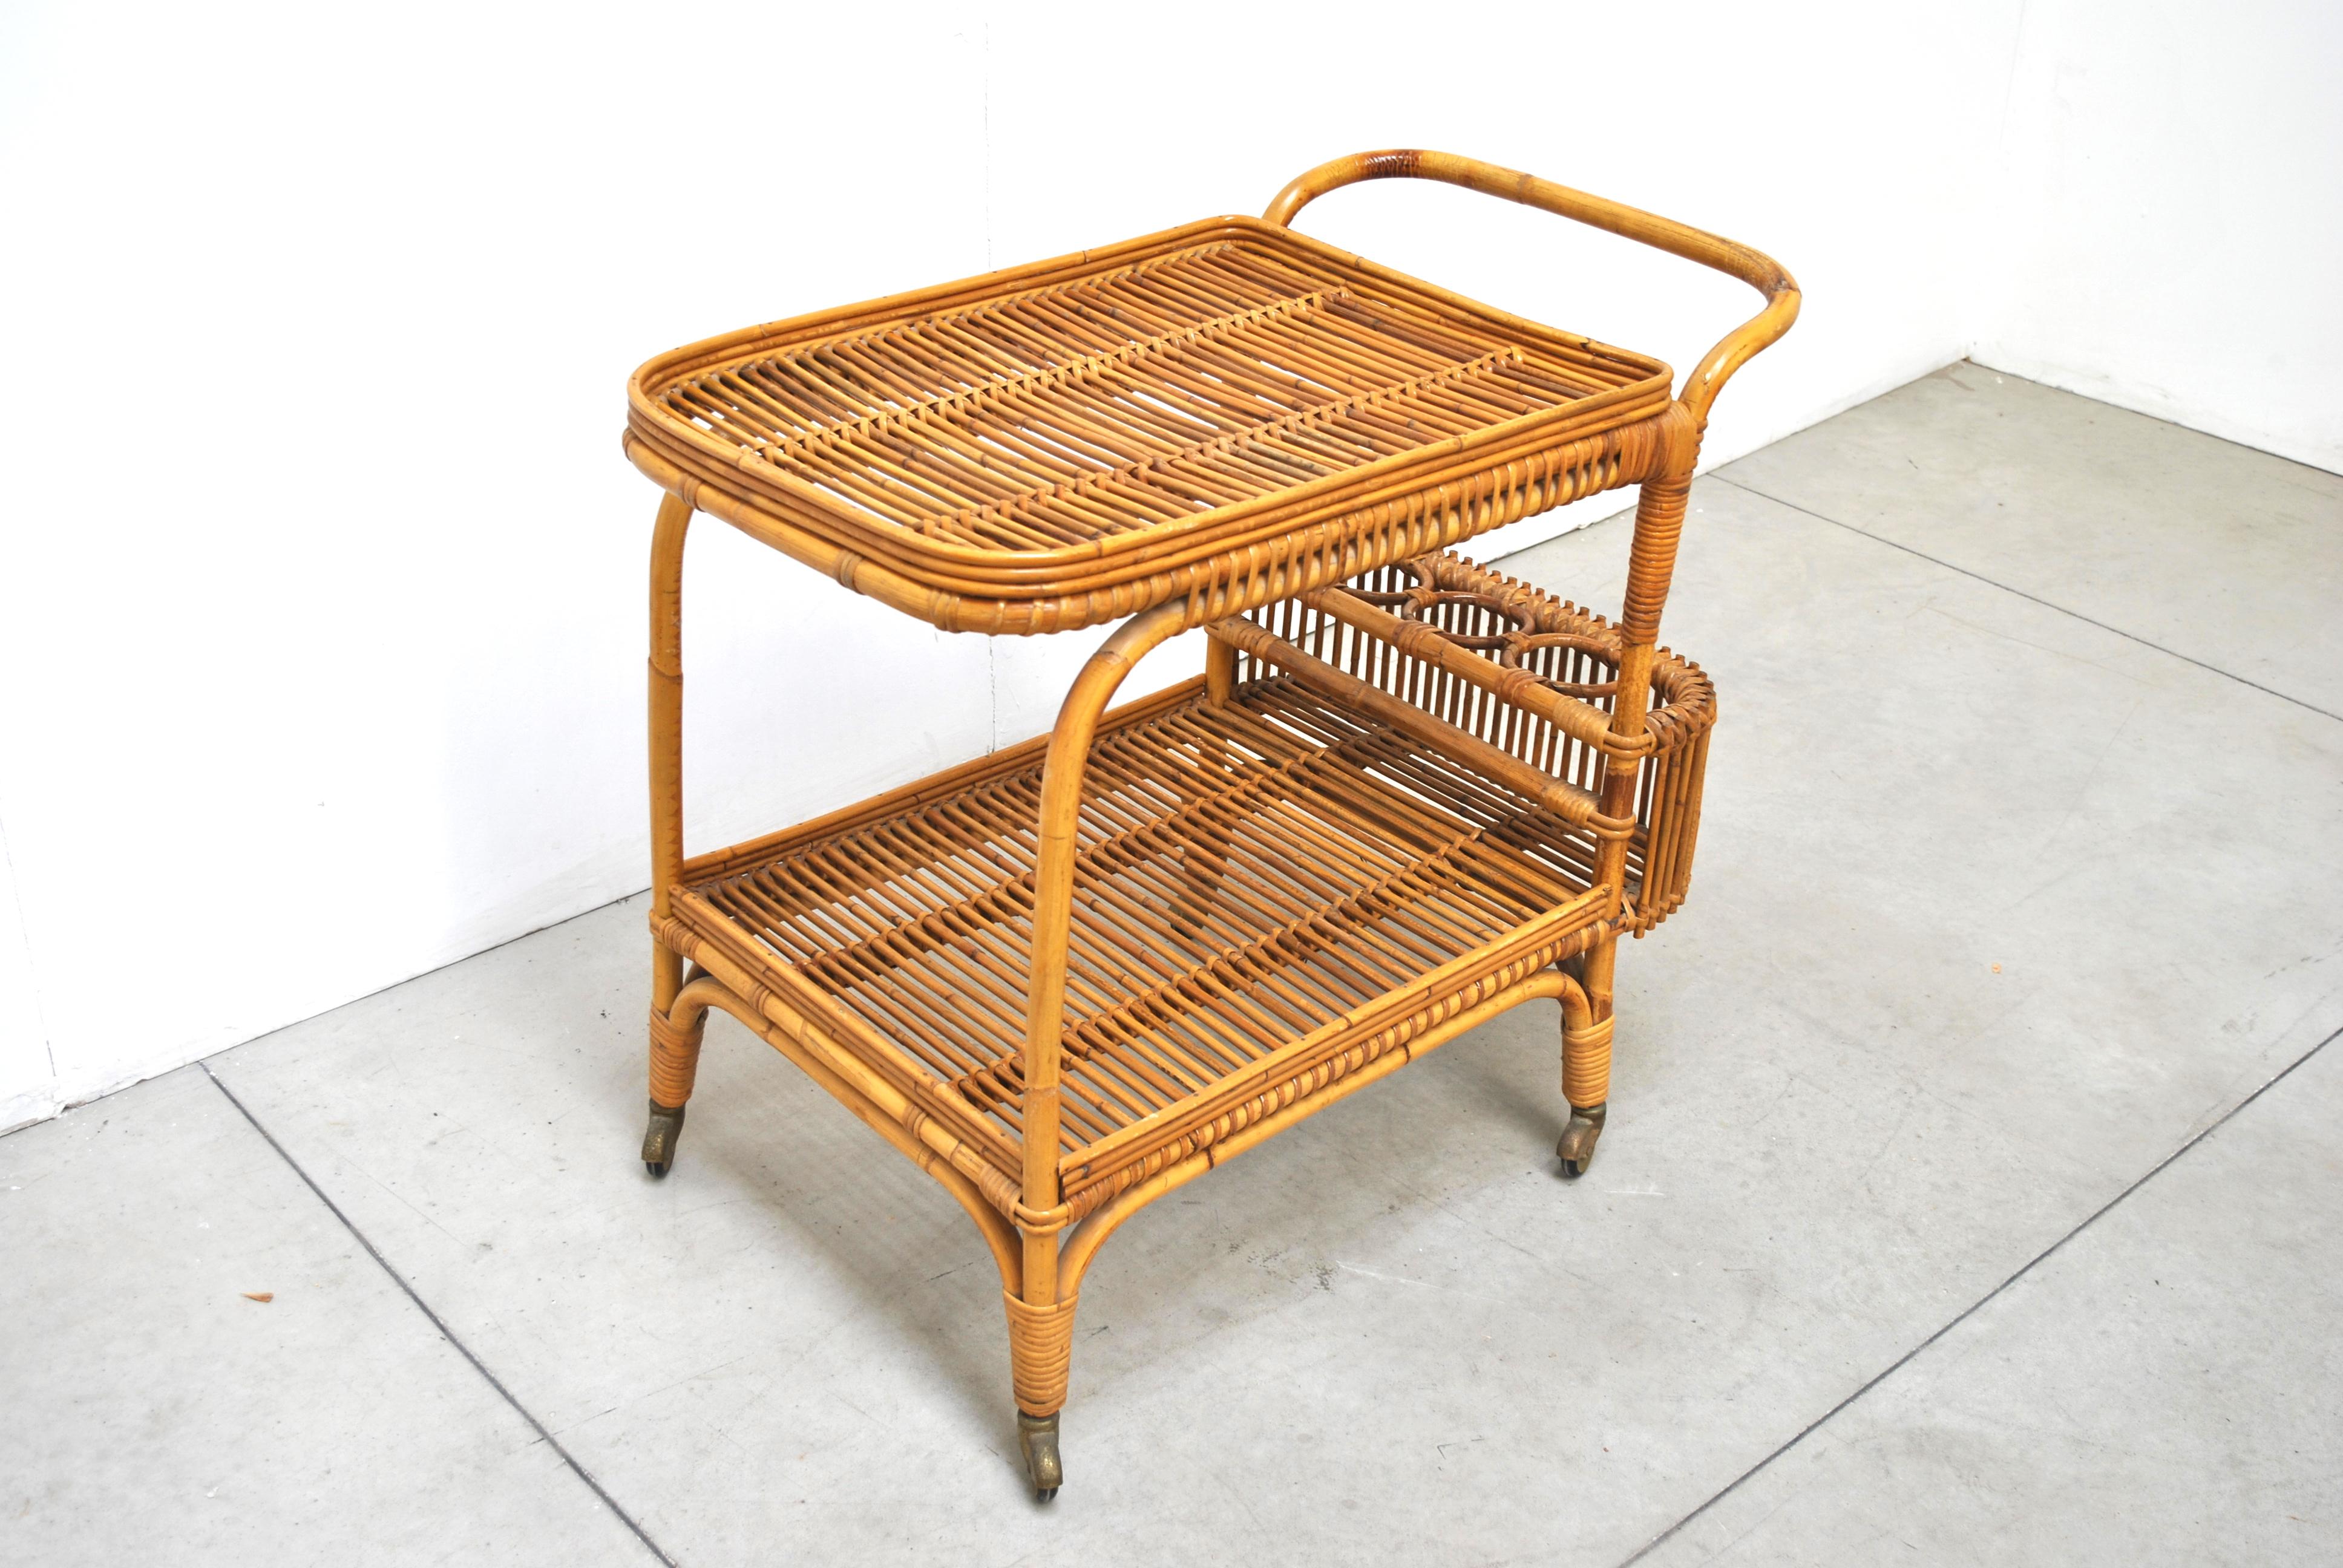 Fabulous bar cart from the 1950s. Made in bamboo and wicker with two large wheels. Bottle rack on the back.